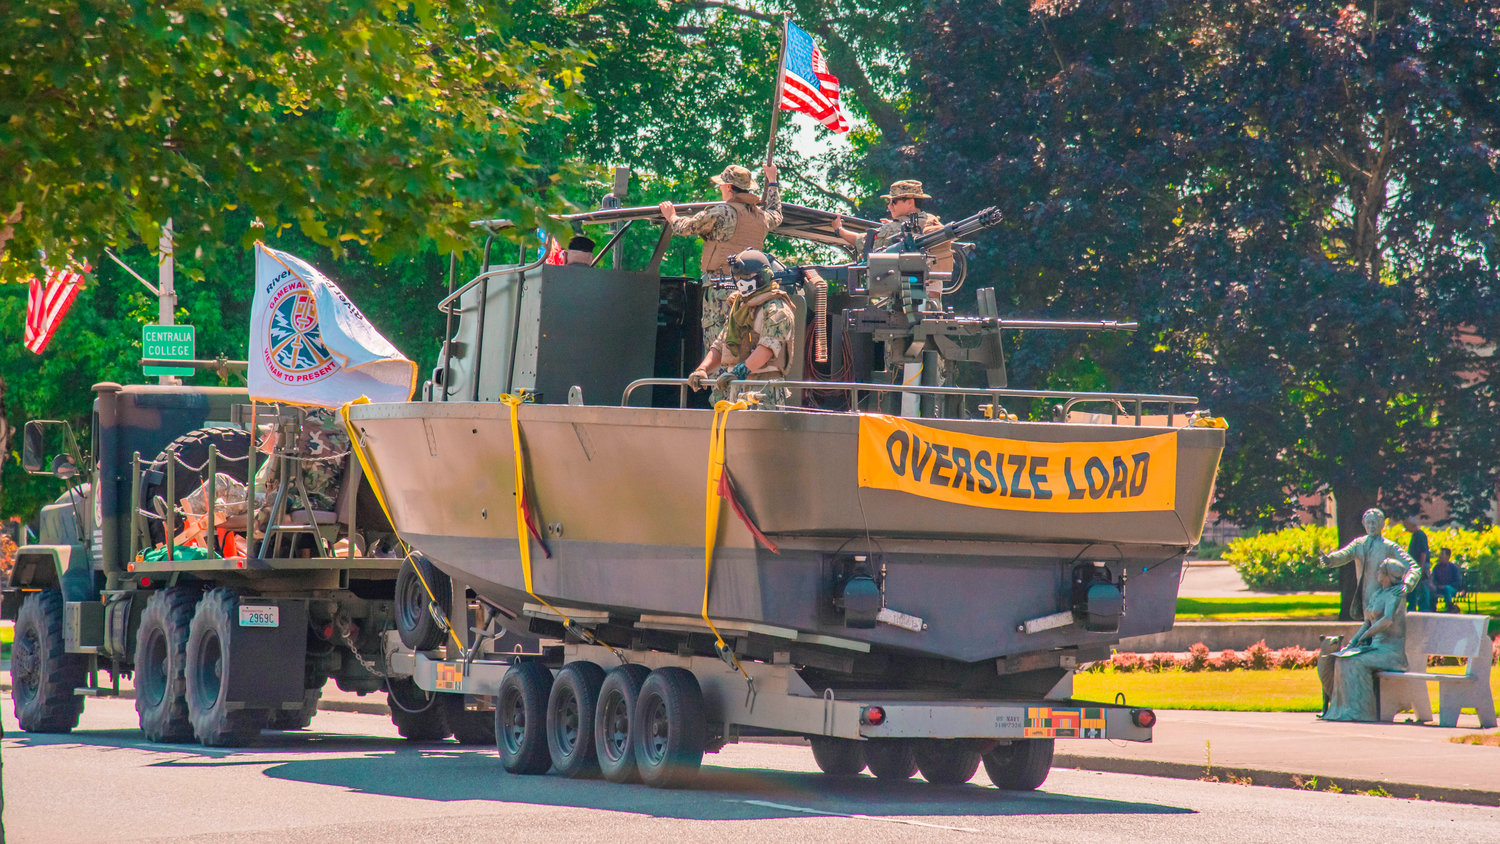 A Vietnam Era PBR boat is pulled behind a military vehichle as they move through downtown Centralia during a “Patriotic Drive,” Sunday afternoon.